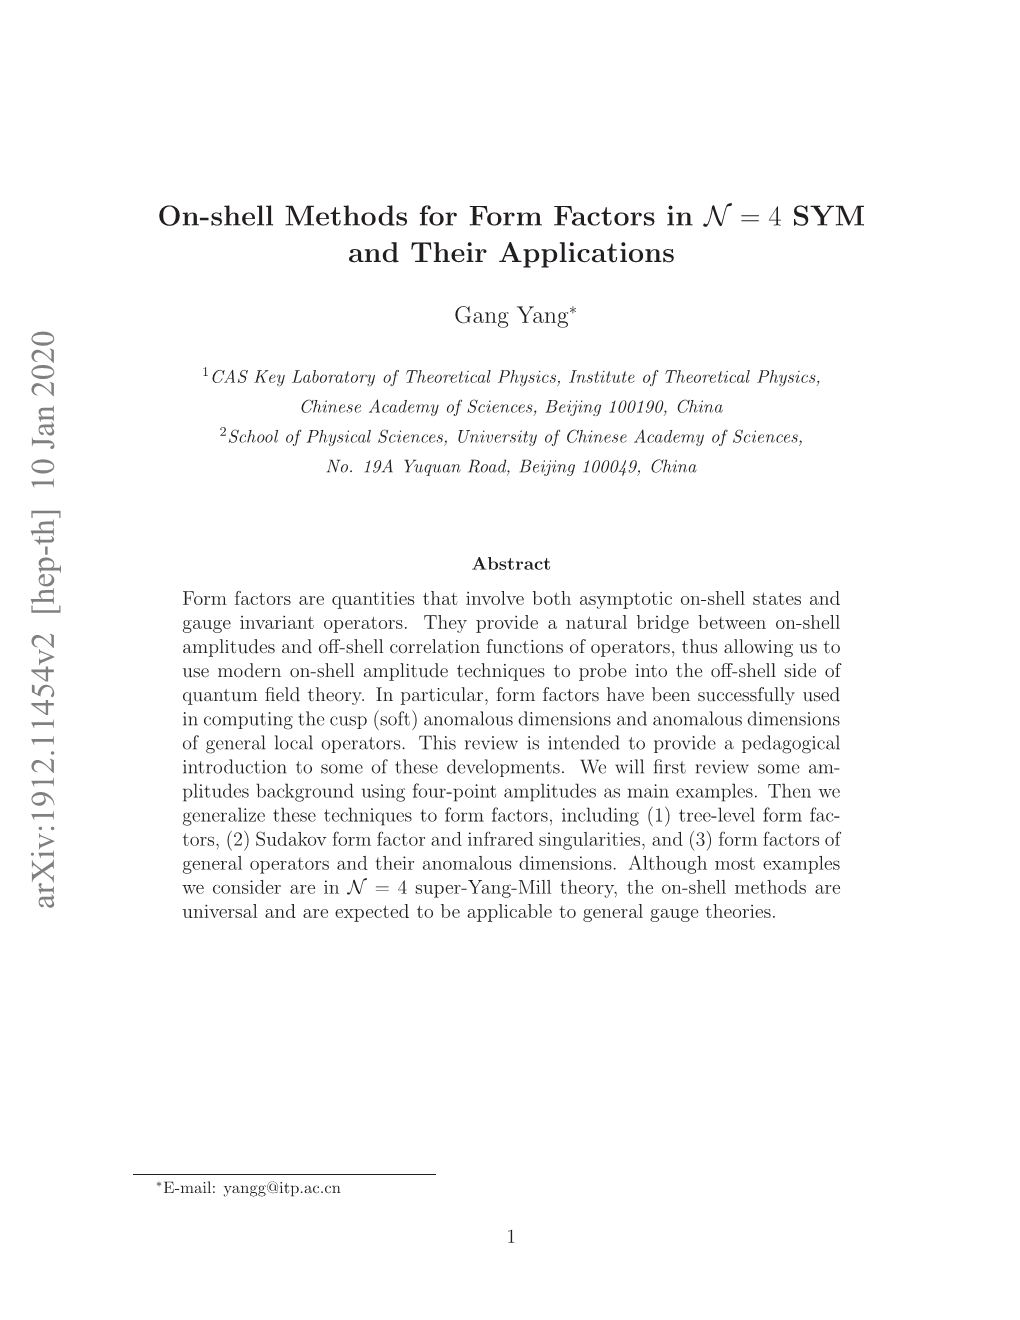 On-Shell Methods for Form Factors in N = 4 SYM and Their Applications